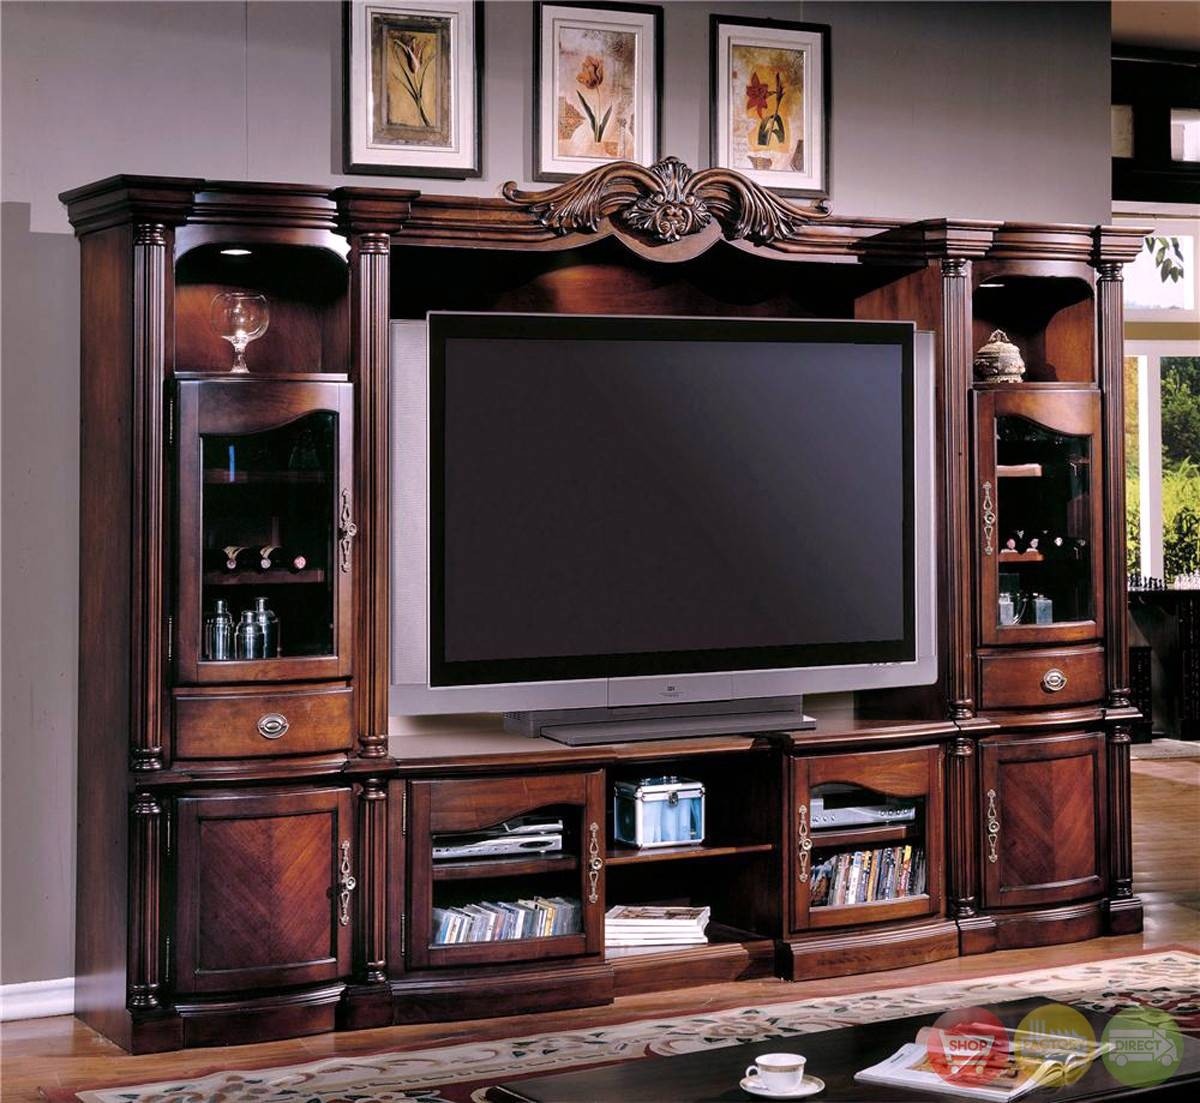 Traditional entertainment wall units